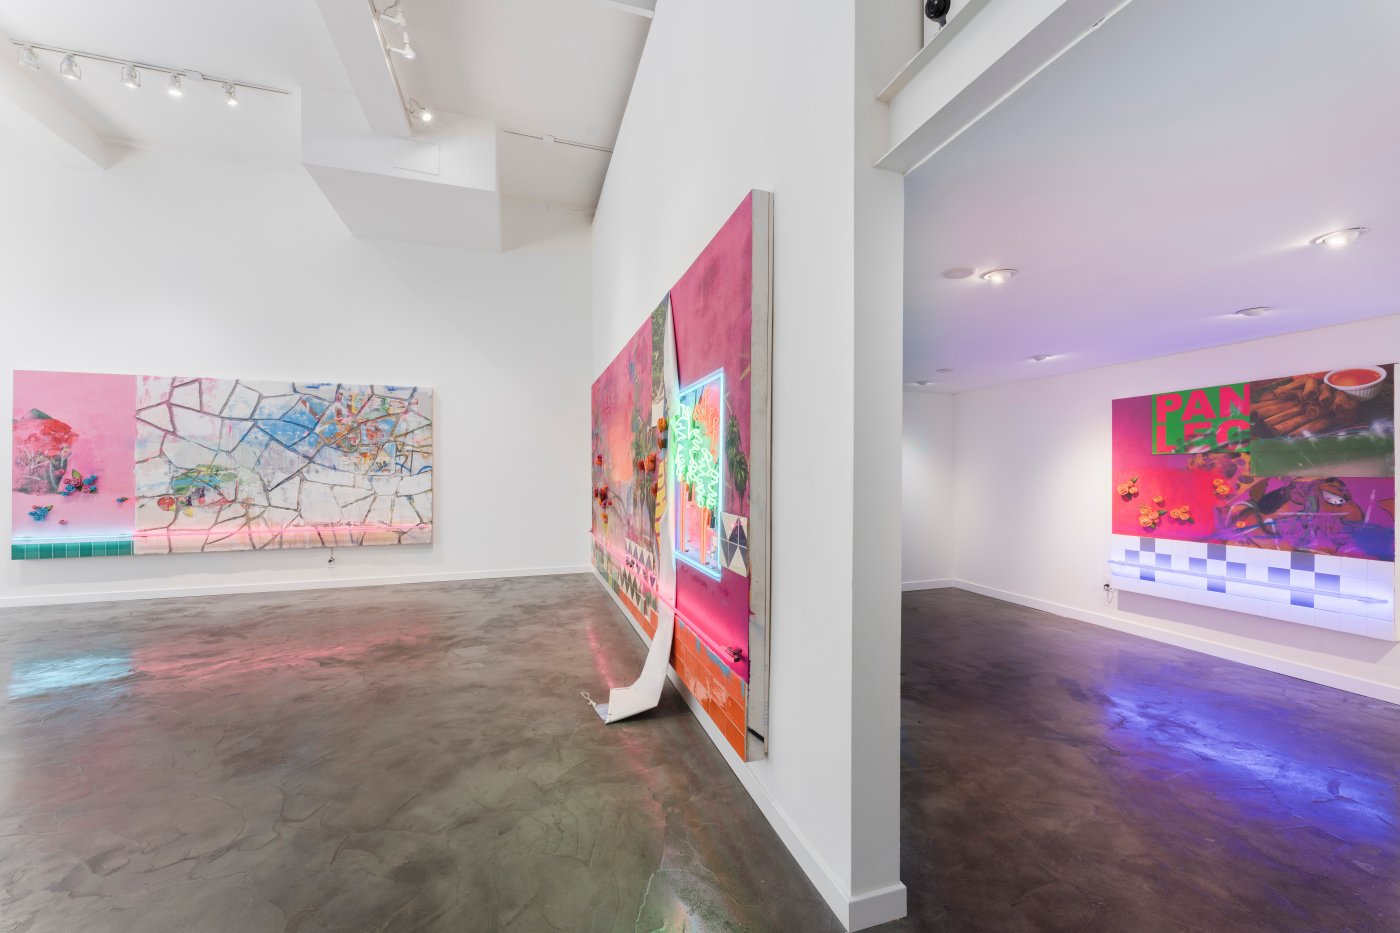 Installation image for Patrick Martinez: Promised Land, at Charlie James Gallery